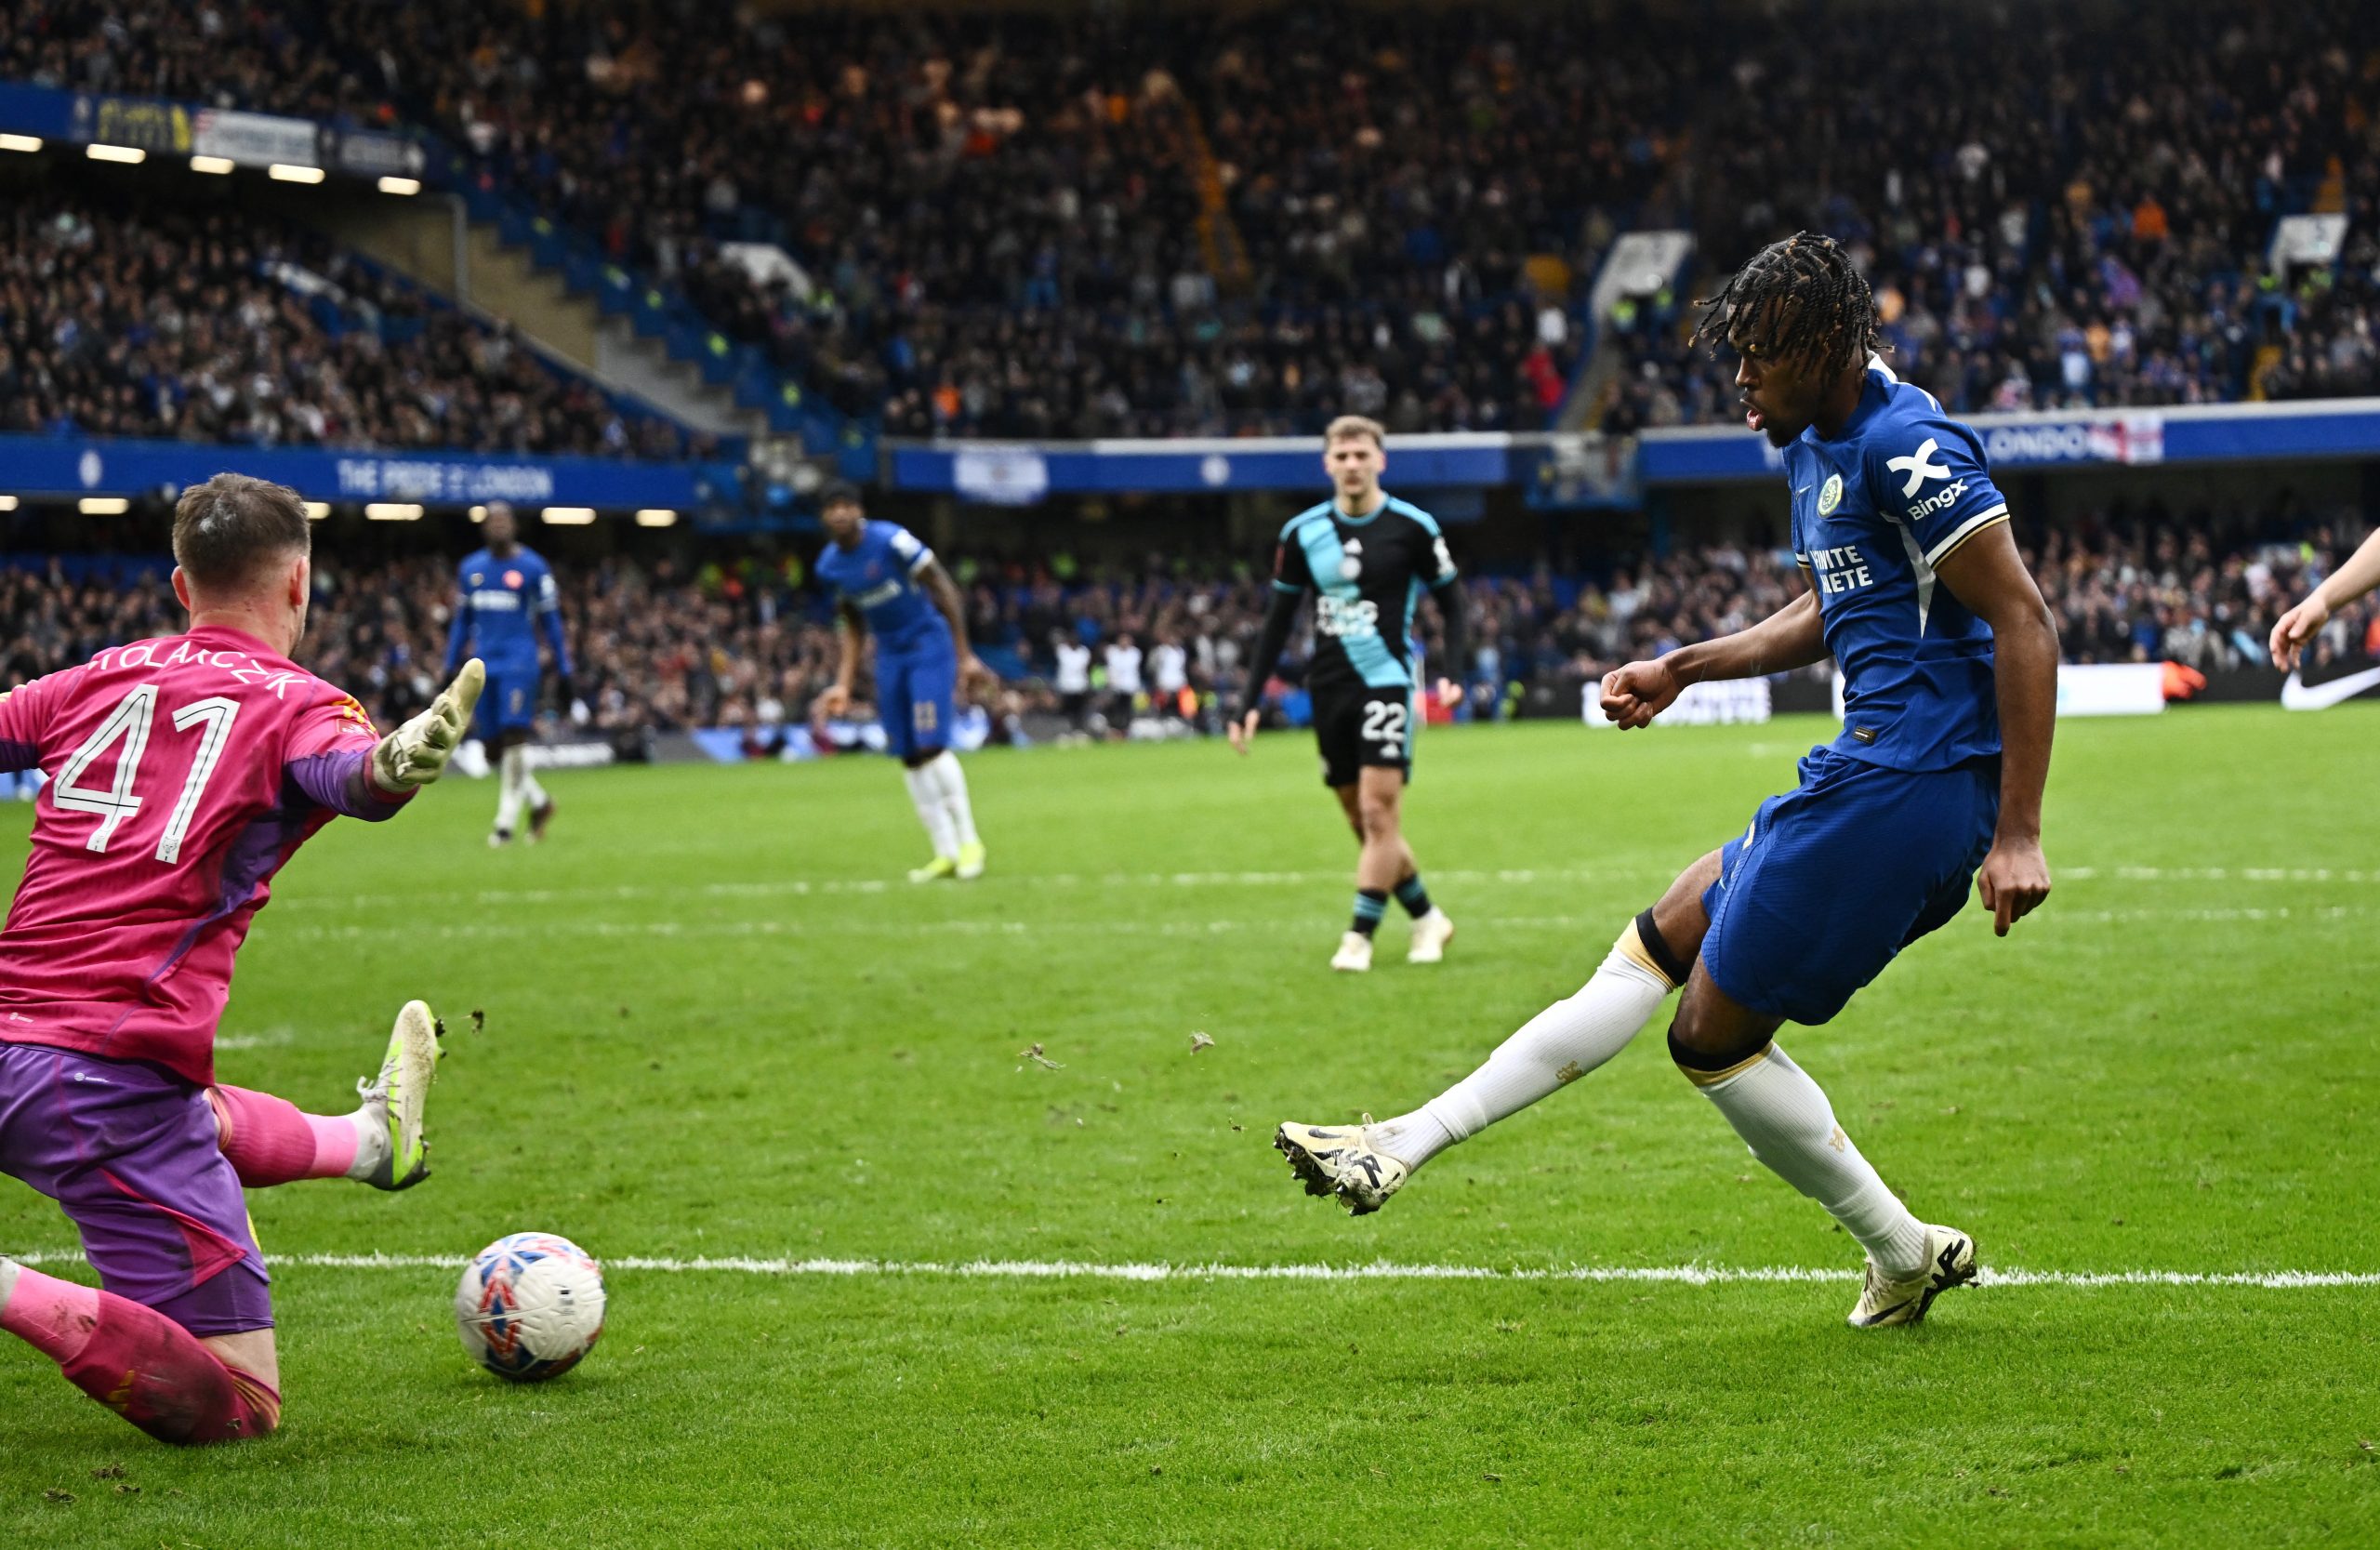 CHELSEA SCORES TWO INJURY-TIME GOALS TO BEAT LEICESTER CITY 4-2 IN FA CUP DRAMA @ HOME